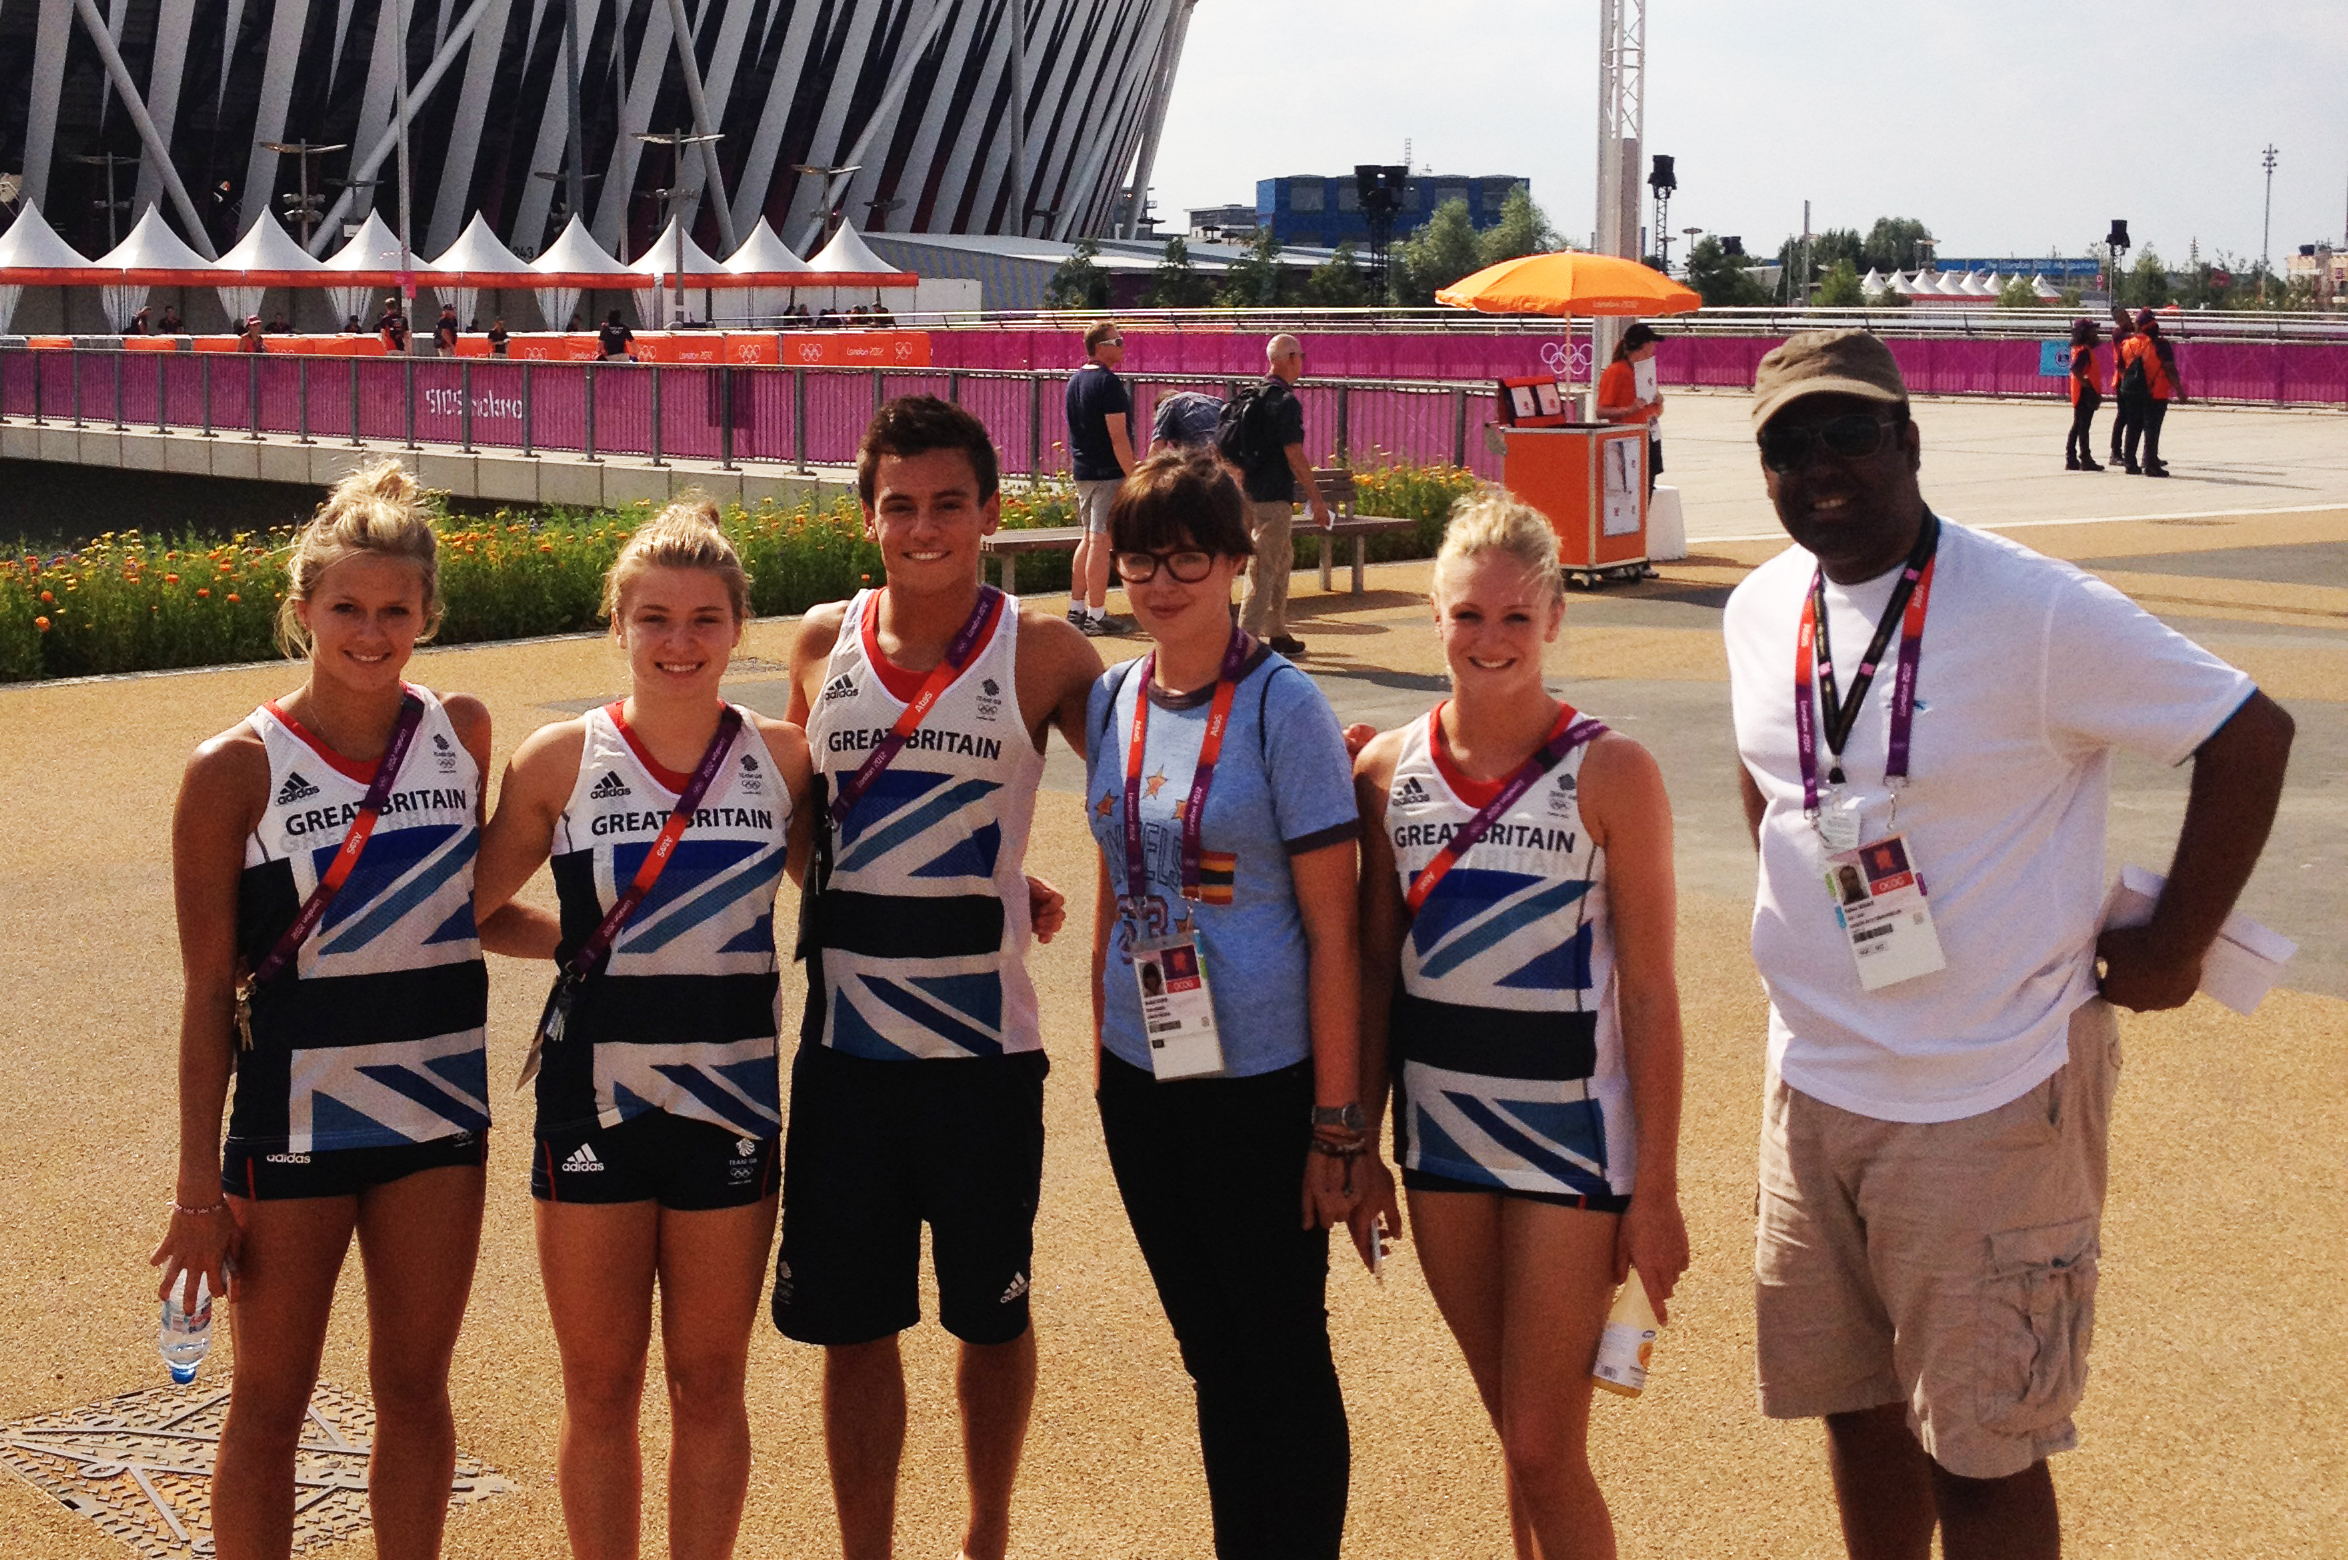 Volunteer Rahim Shamji with members of the British Olympic team. Shamji will be a drummer in the opening ceremony of the London 2012 Olympic Games. Photo: Courtesy of Rahim Shamji